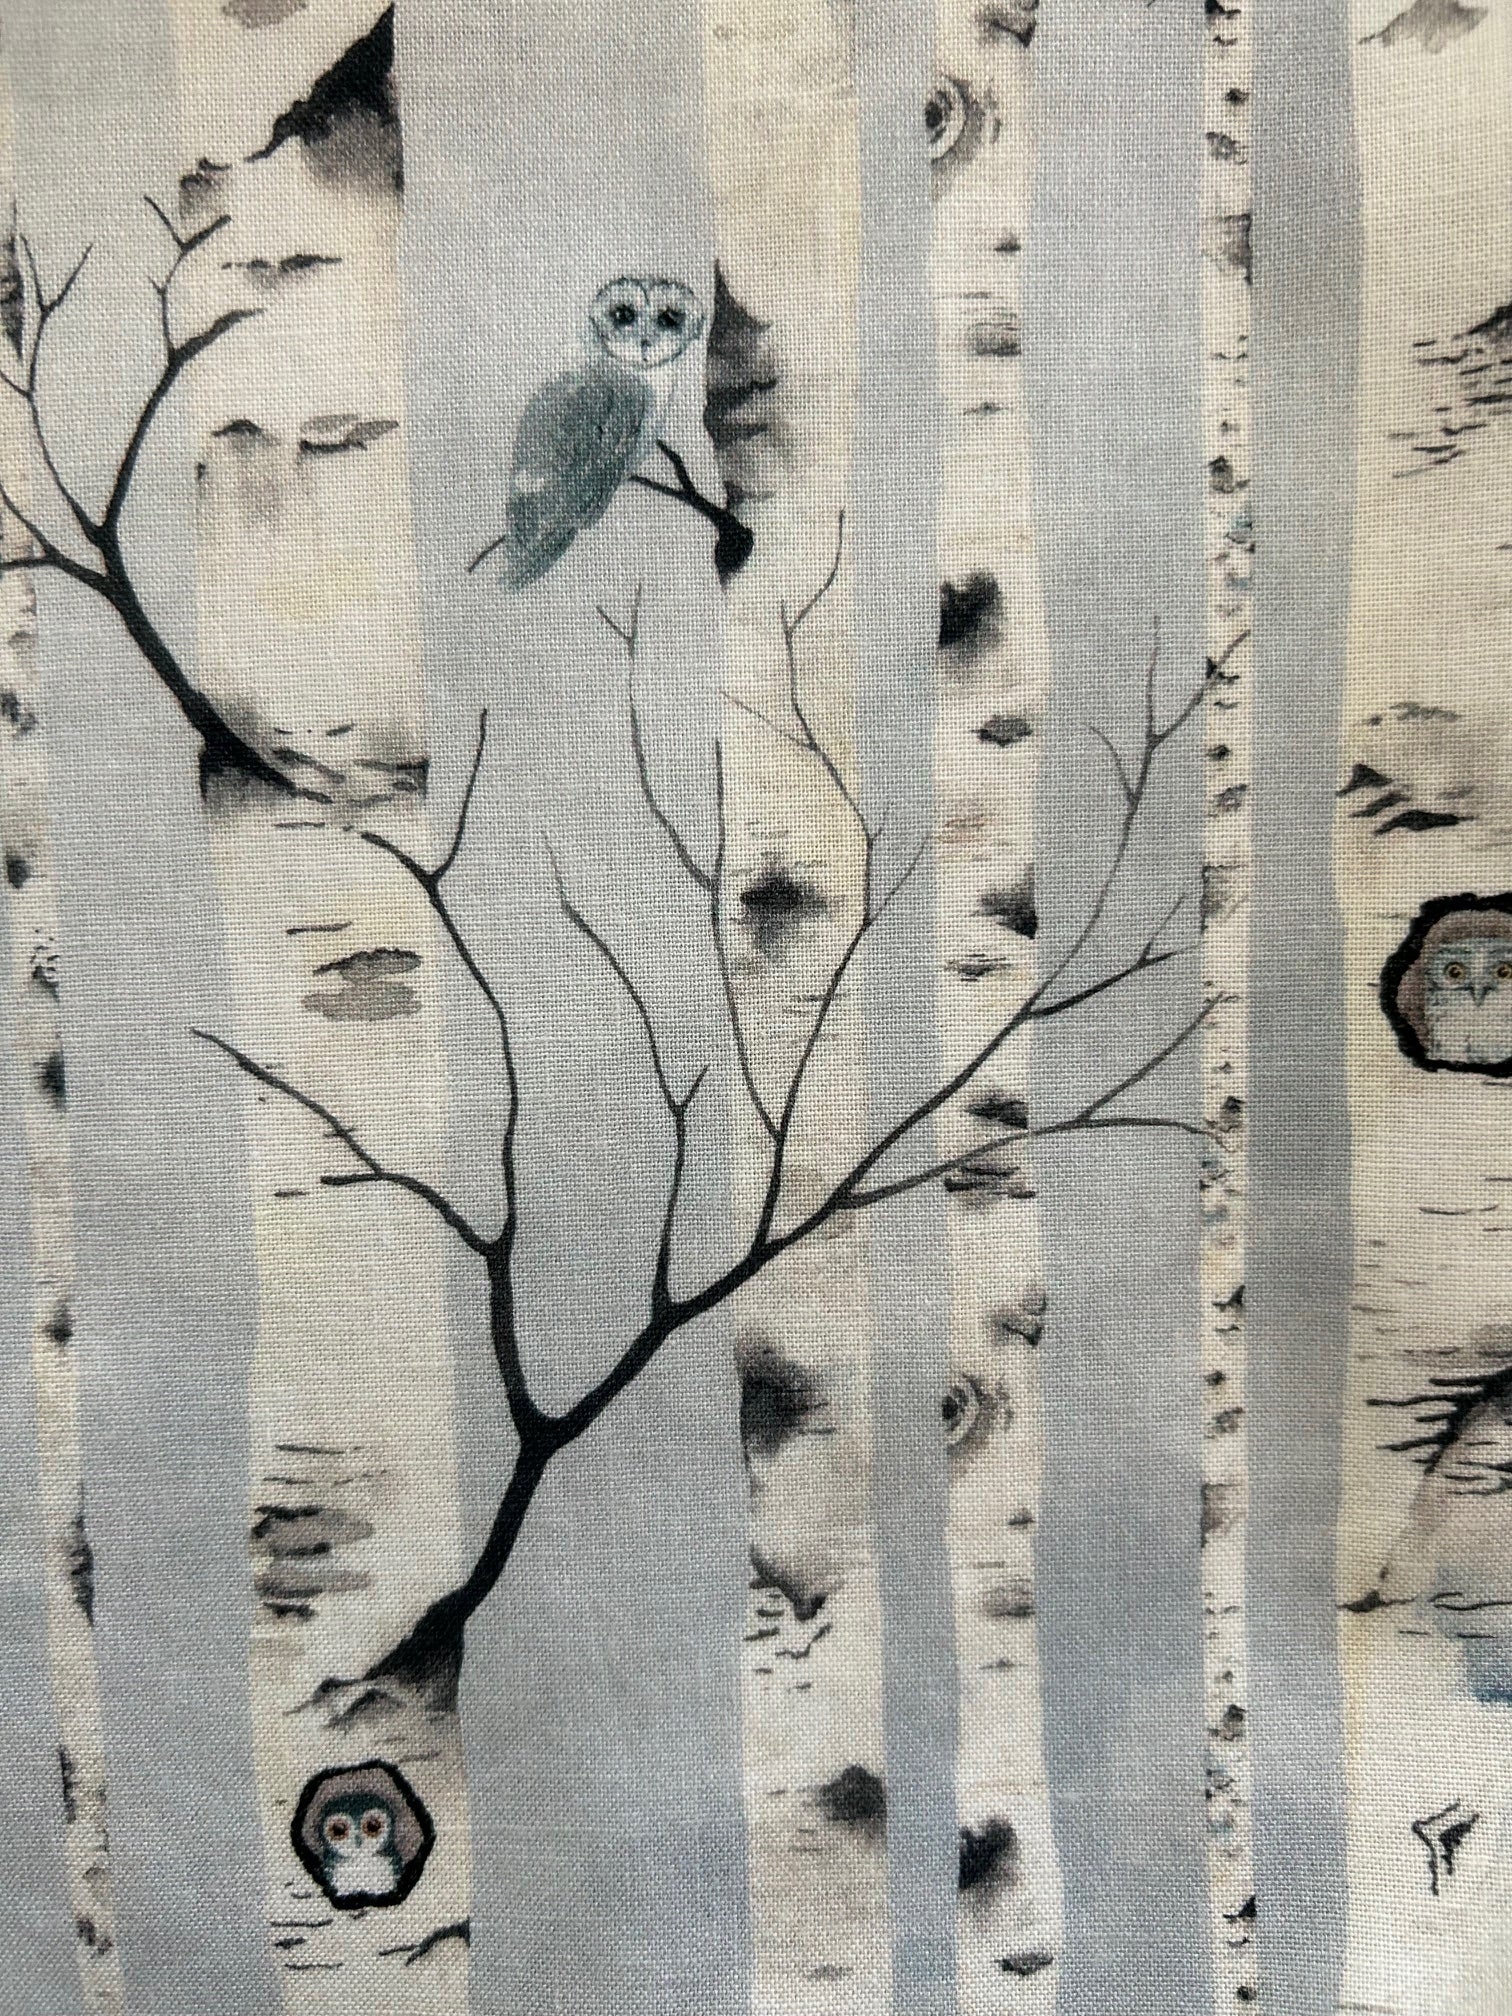 a close up of print showing owls hiding in birch trees